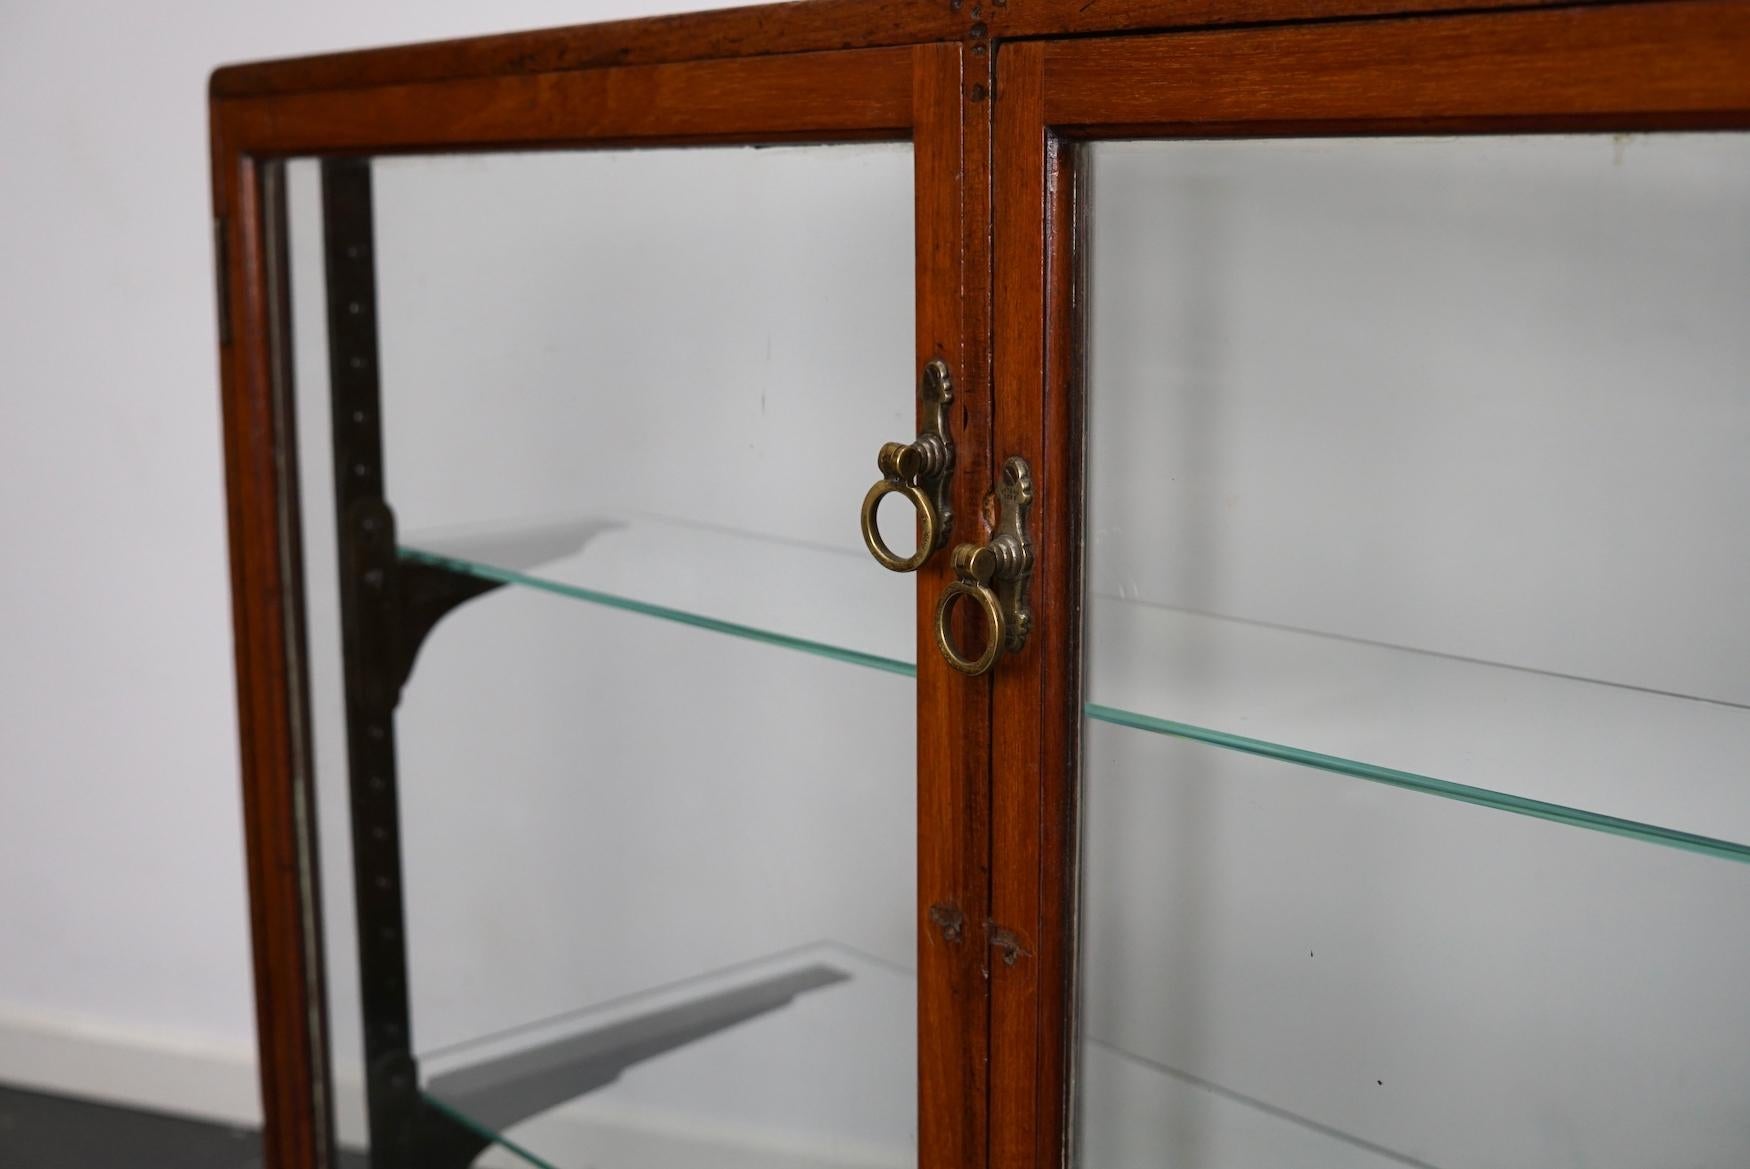 British Victorian Mahogany Shop Display Cabinet / Counter or Vitrine, Late 19th Century For Sale